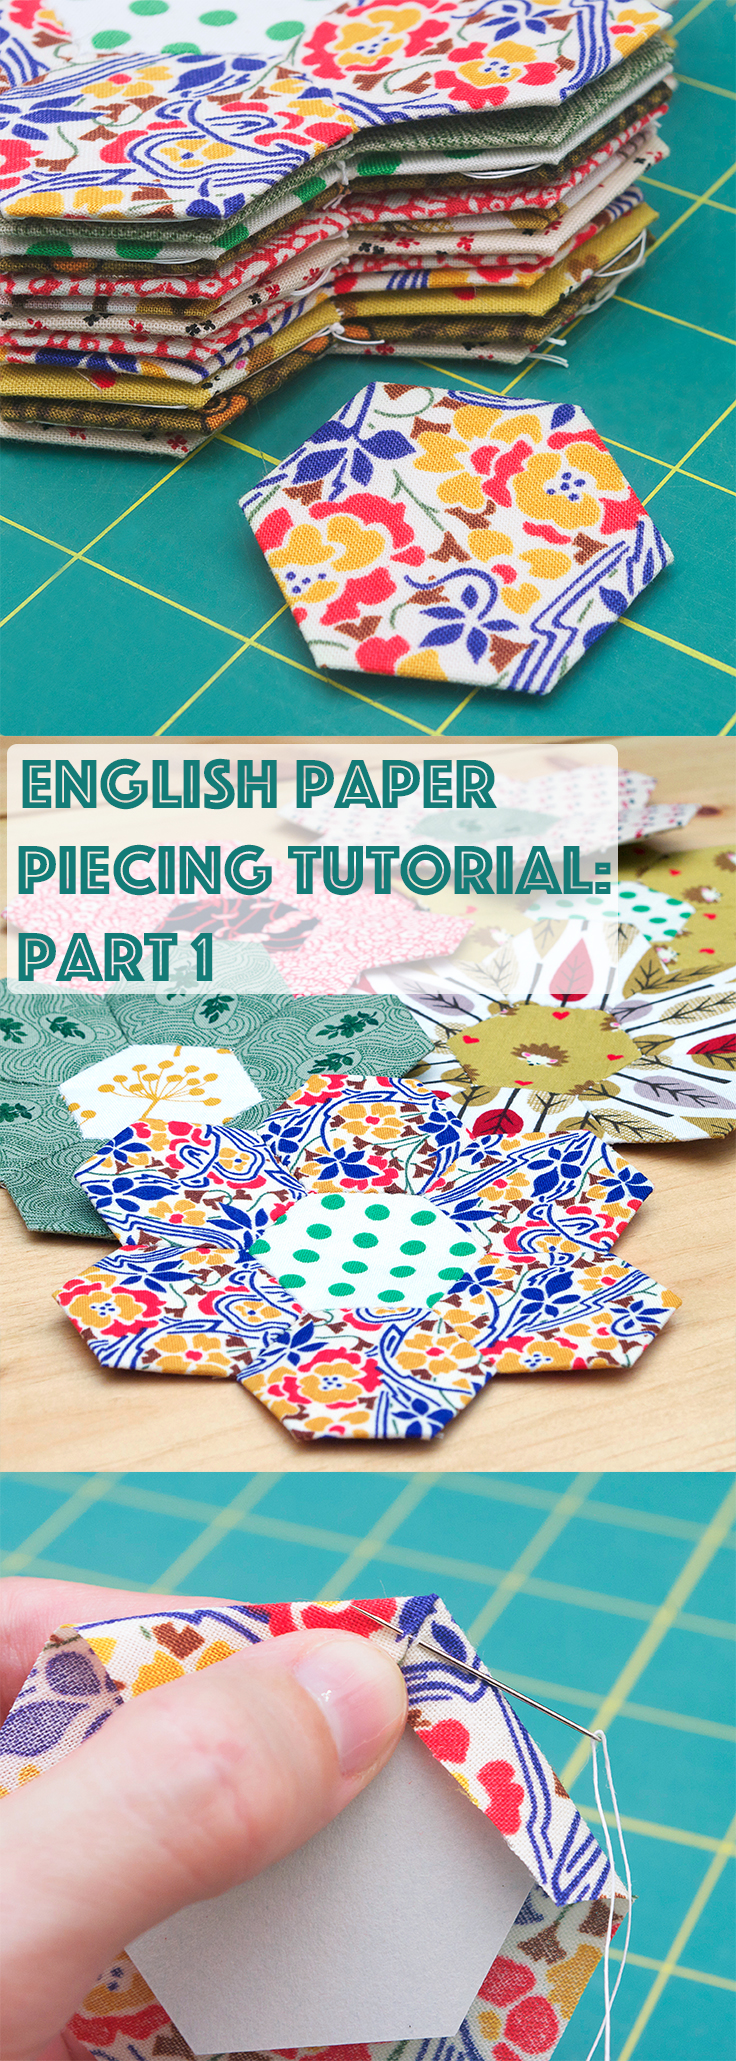 How To: English Paper Piecing